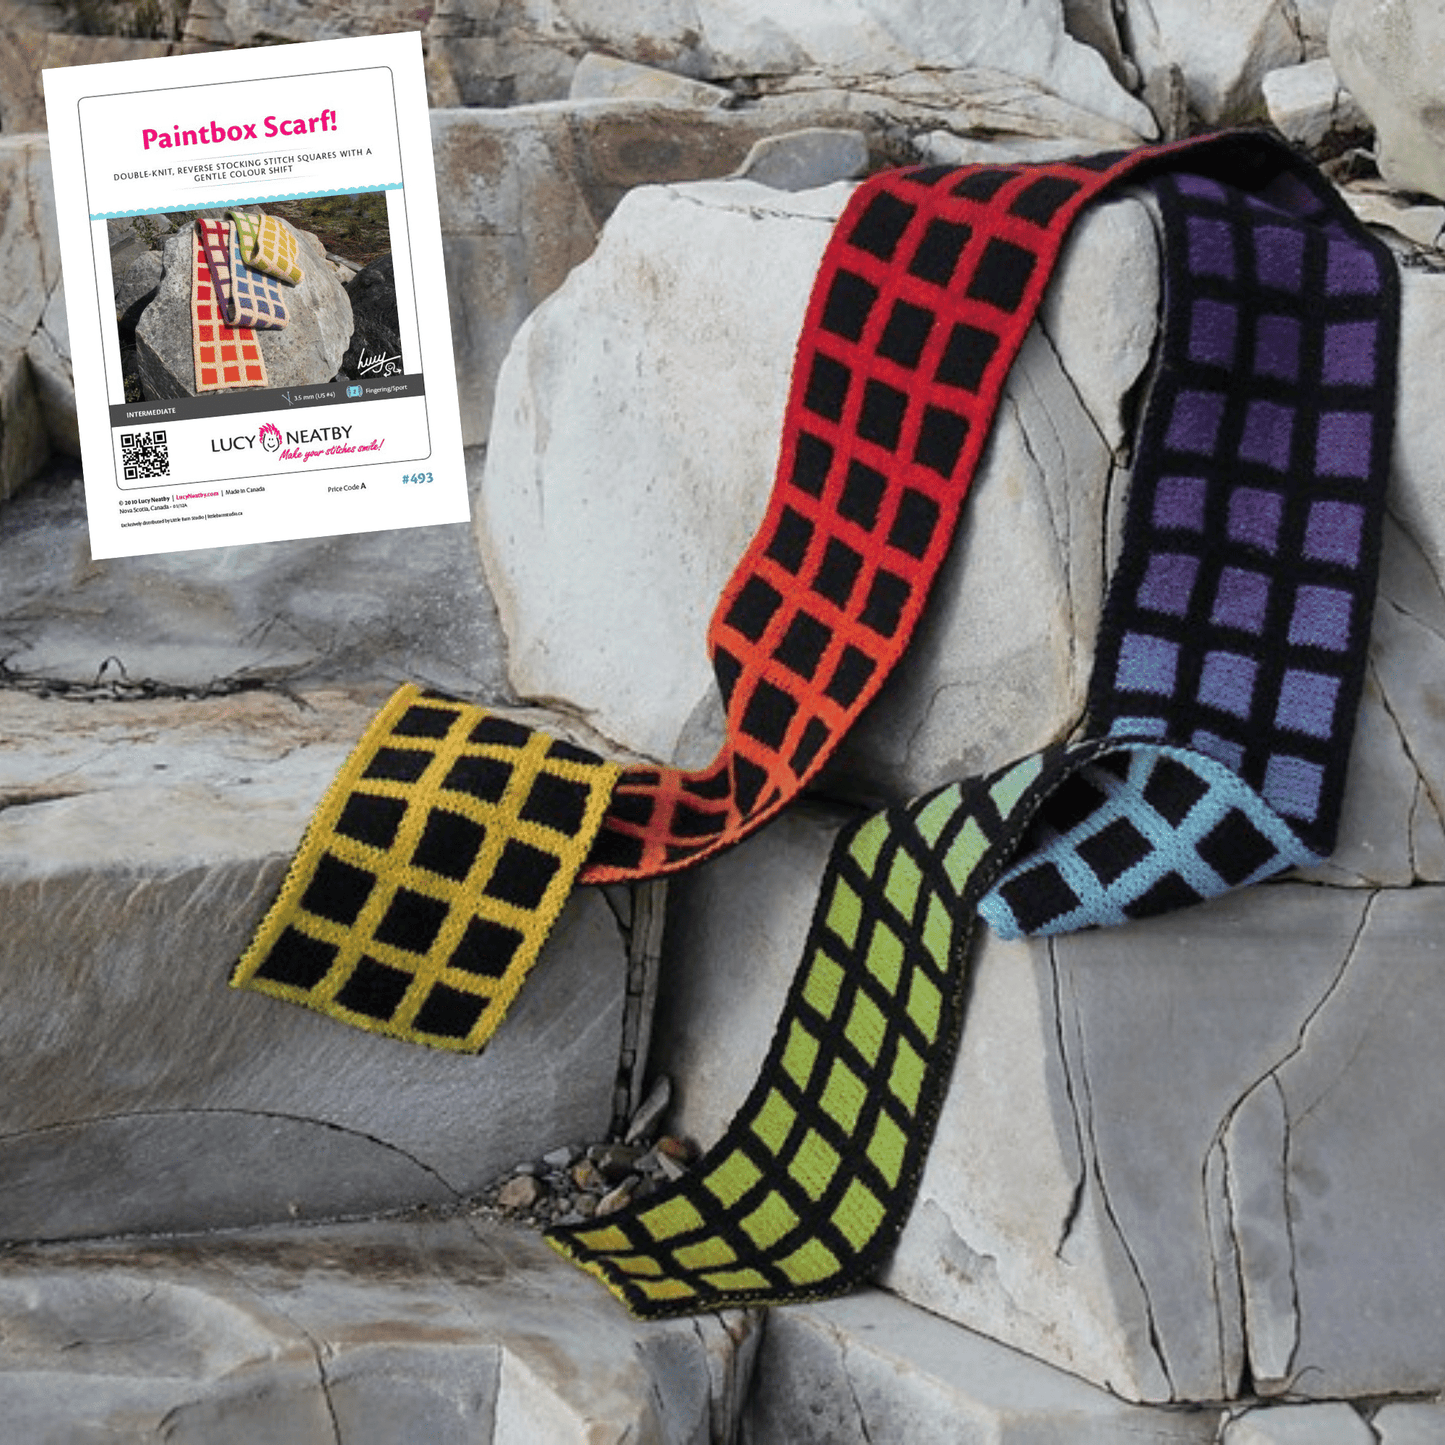 Paintbox Double Knit Scarf by Lucy Neatby - Digital Pattern